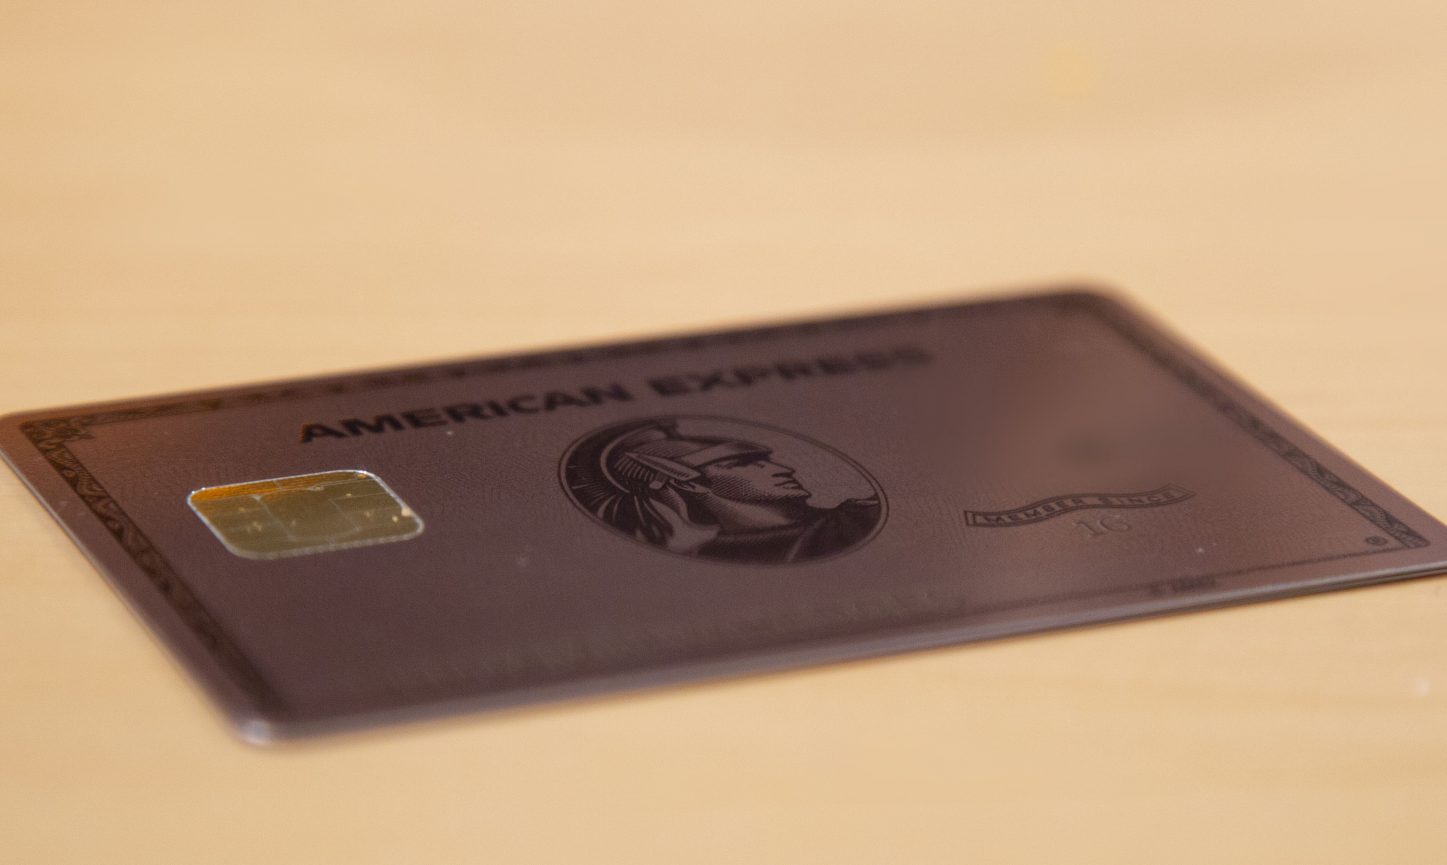 The Rose Gold version of the Amex Gold Card